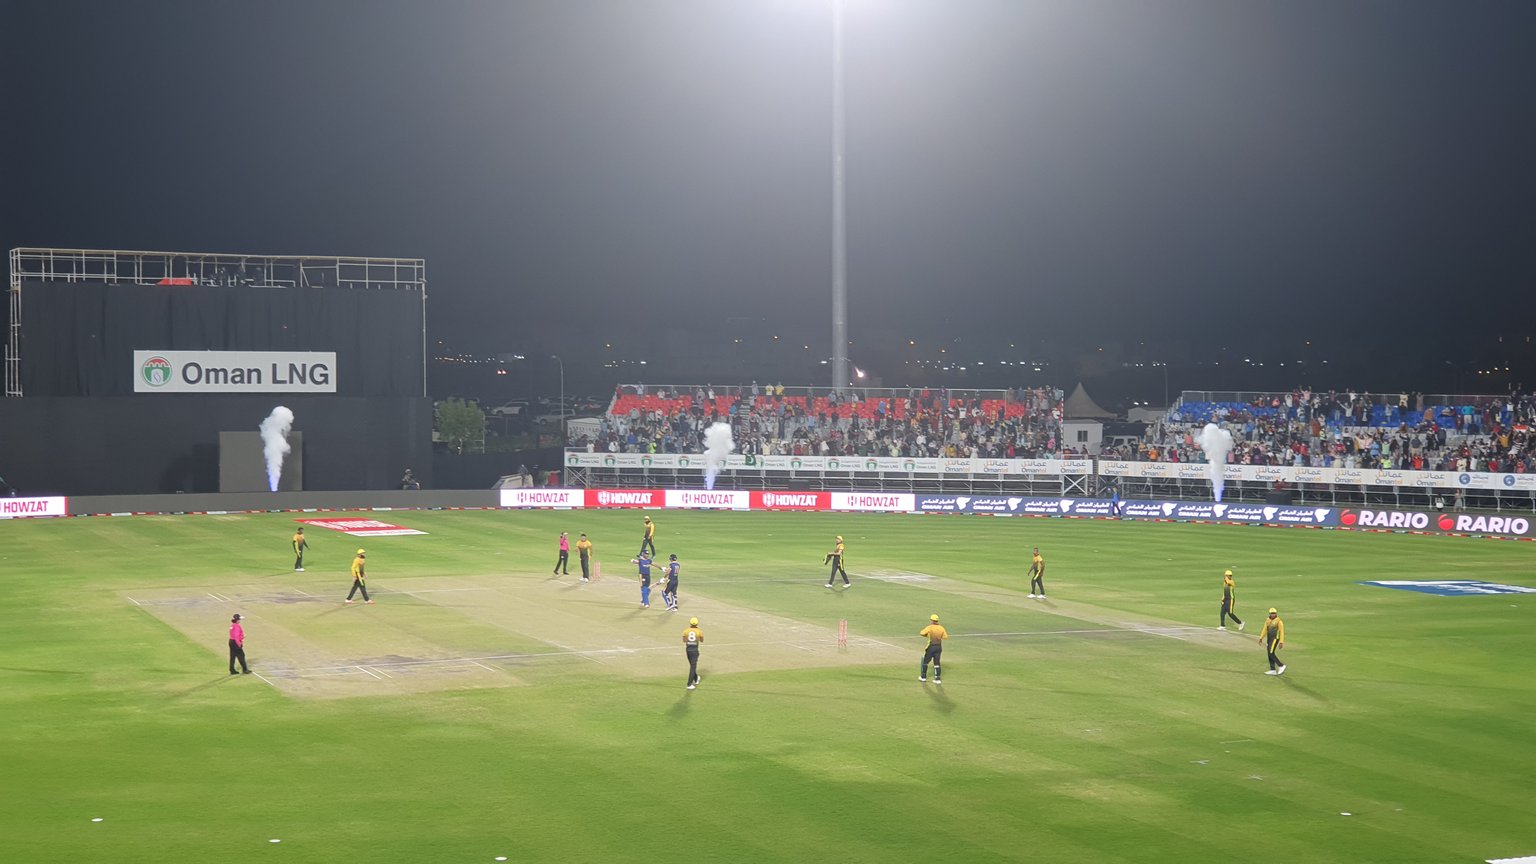 My first time experience of watching a live Cricket match — Hive